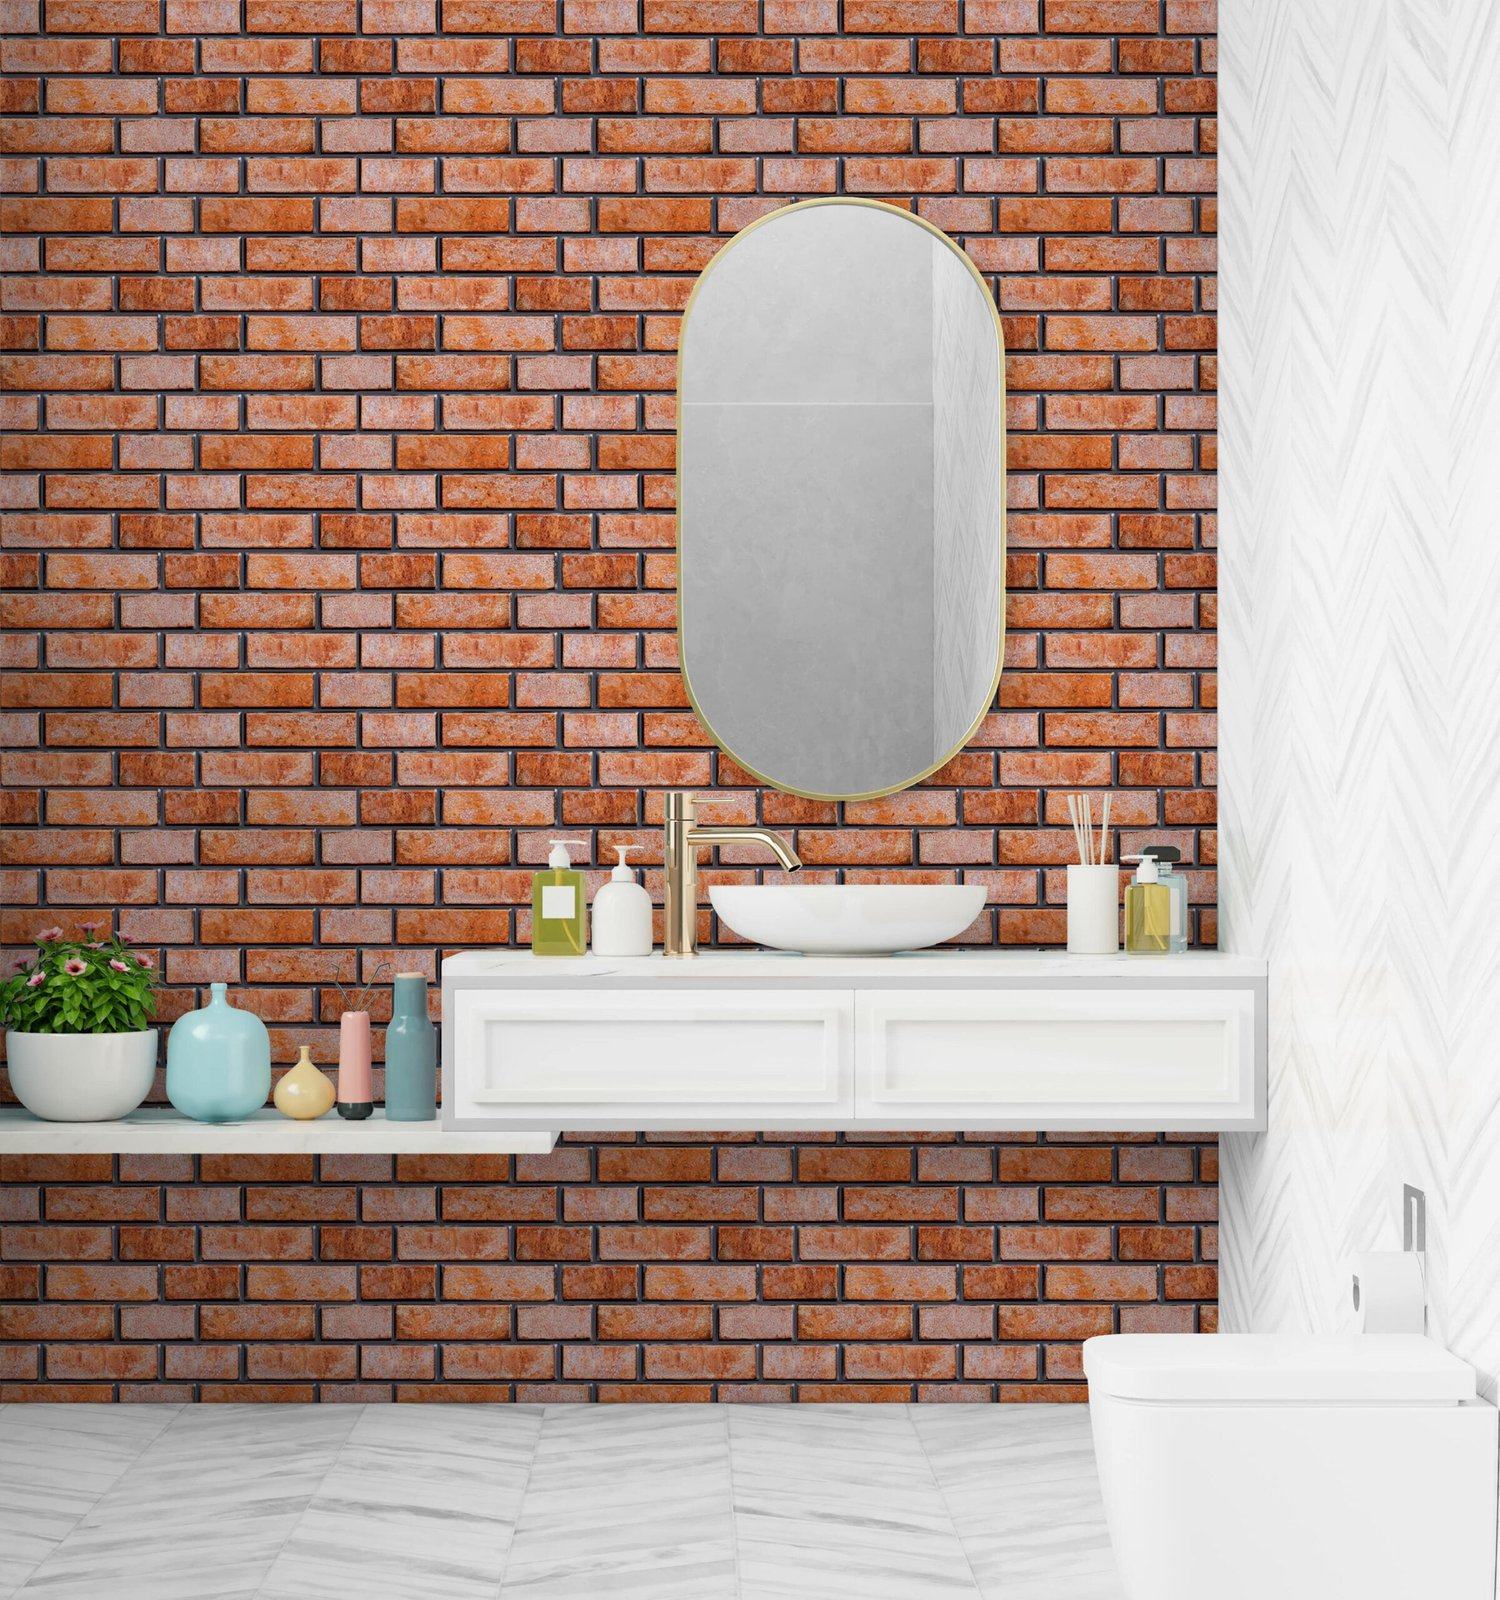 Peel and Stick 3D Tiles Red Bricks Peel and Stick Tiles - Mosaicowall Mosaicowall Red Bricks Peel and Stick Tiles